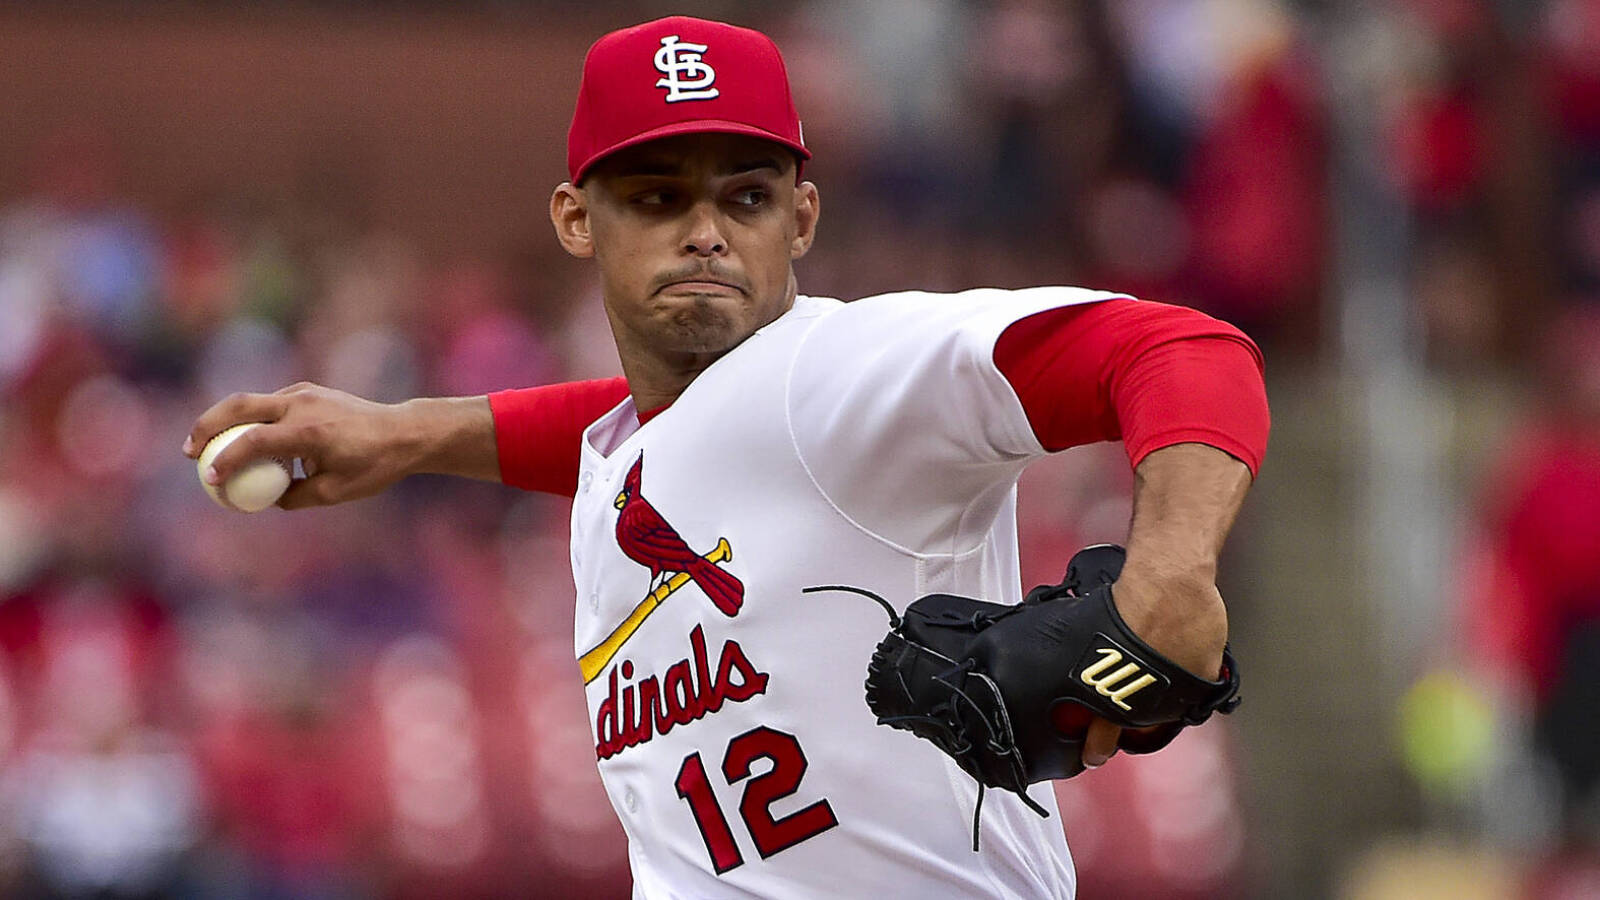 Cardinals place righty Jordan Hicks on IL with forearm strain